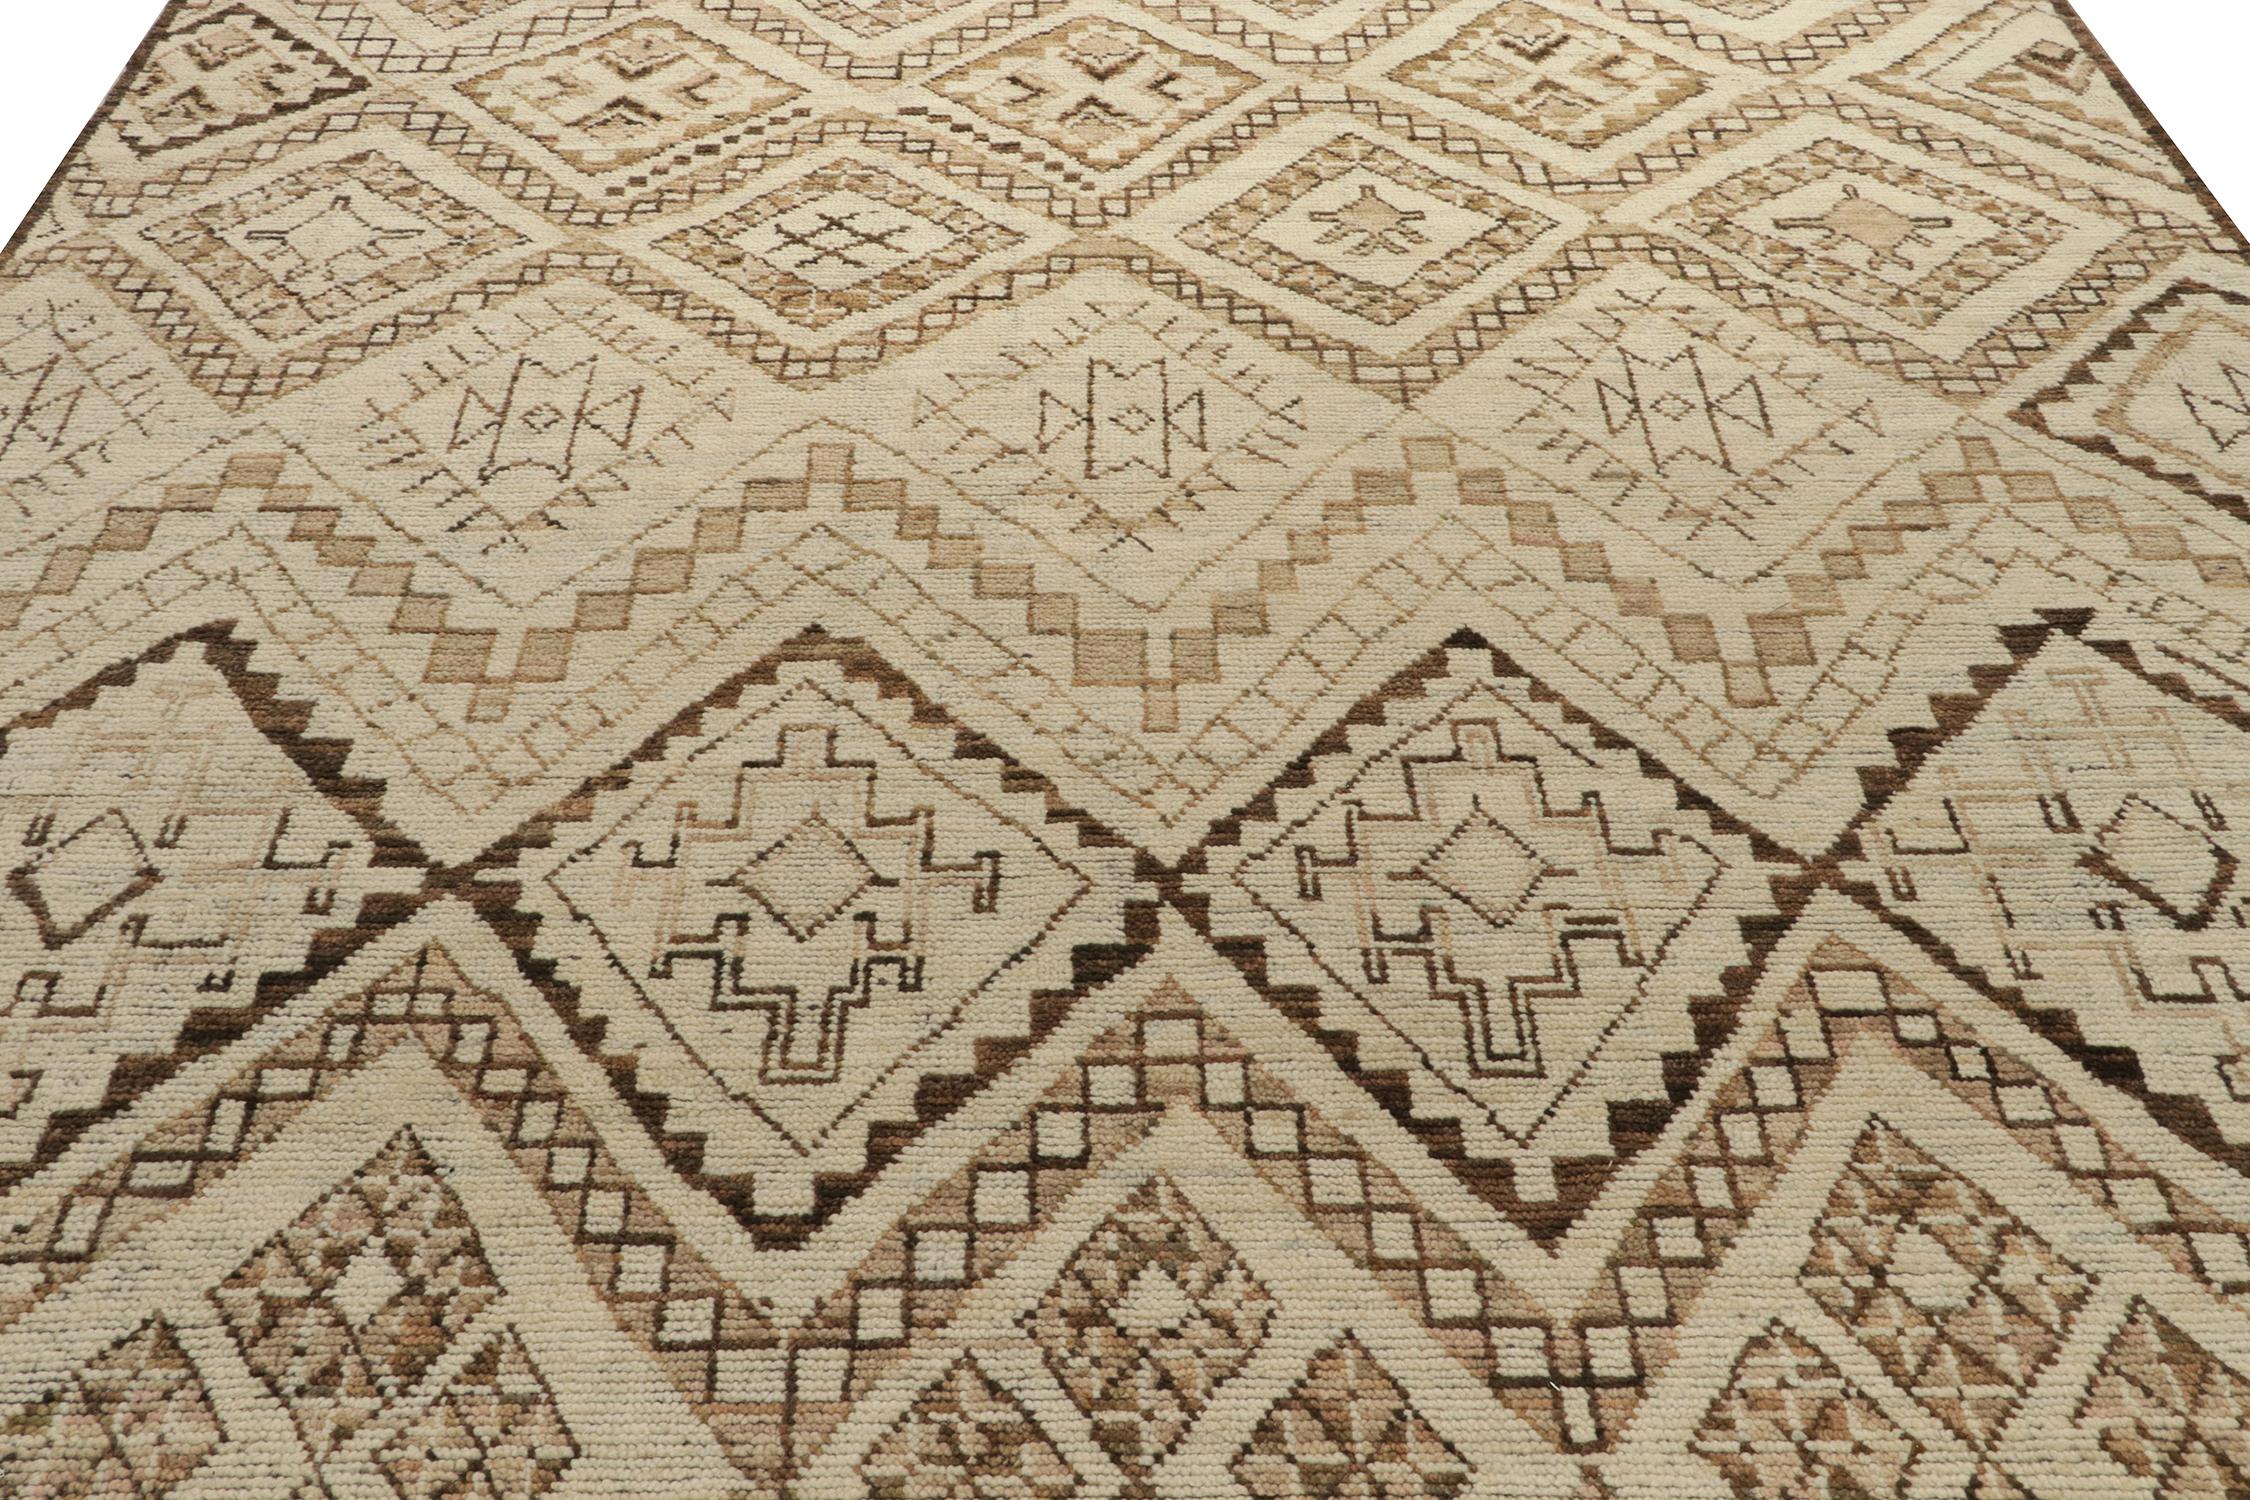 Hand-Knotted Rug & Kilim’s Moroccan Style Rug in Beige-Brown Tribal Geometric Patterns For Sale